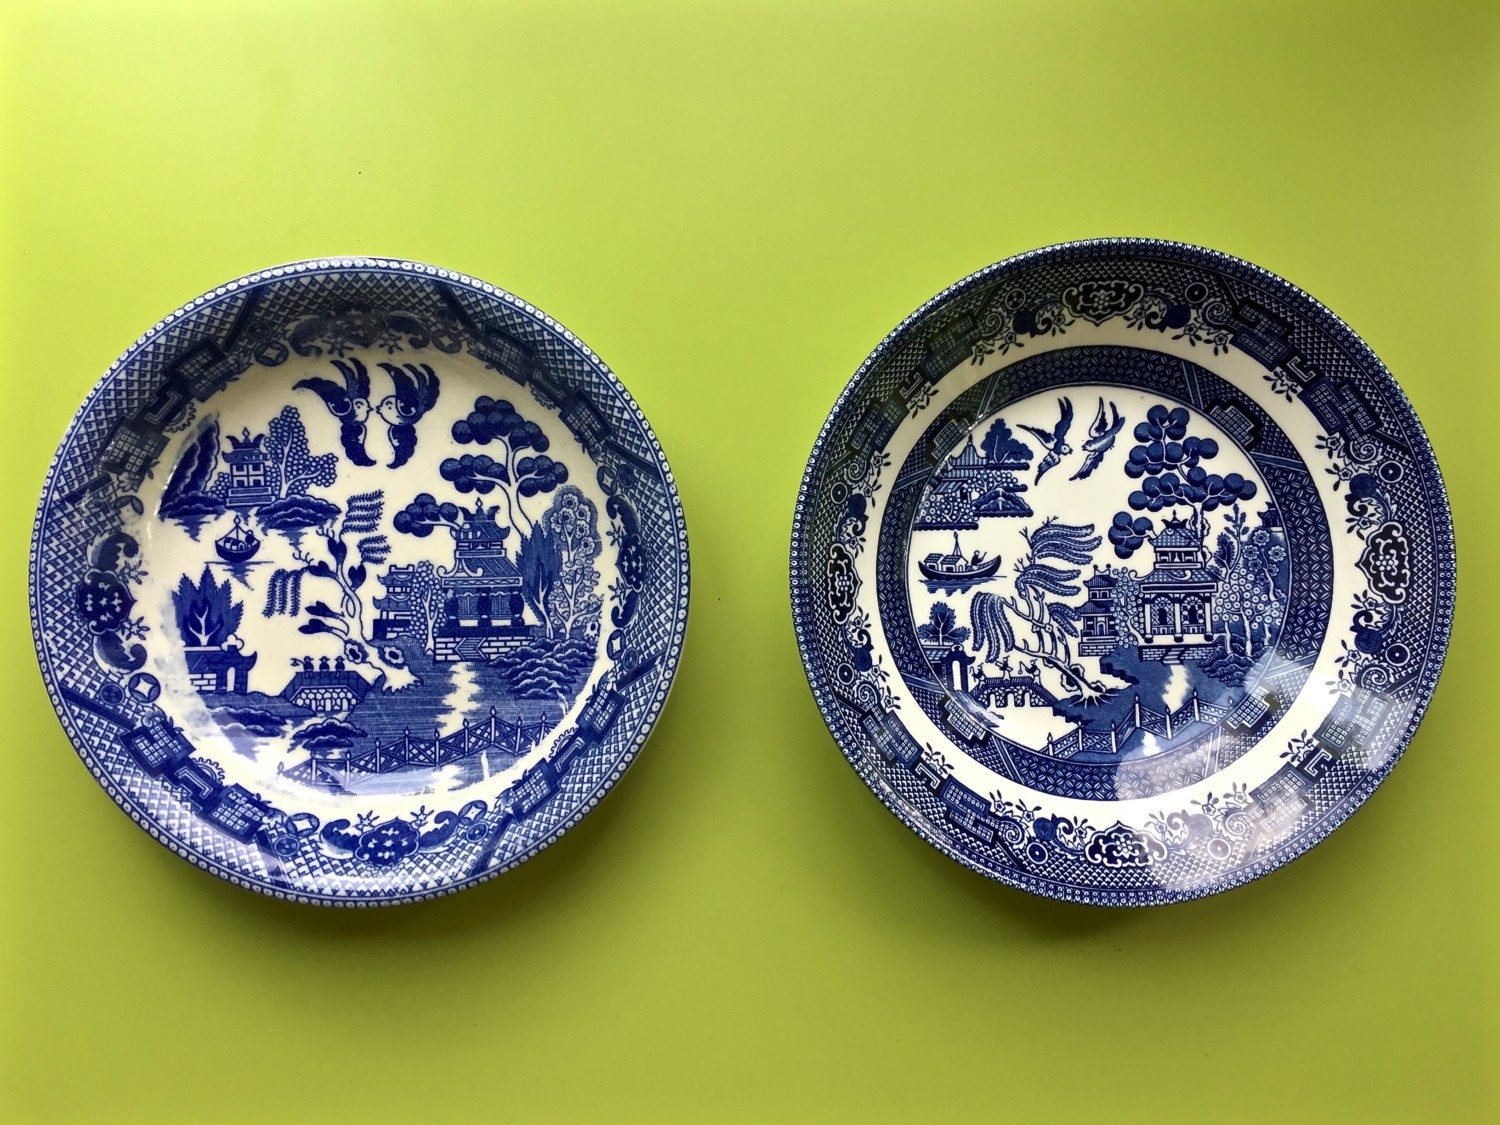 China marks made in vintage Identifying Marks